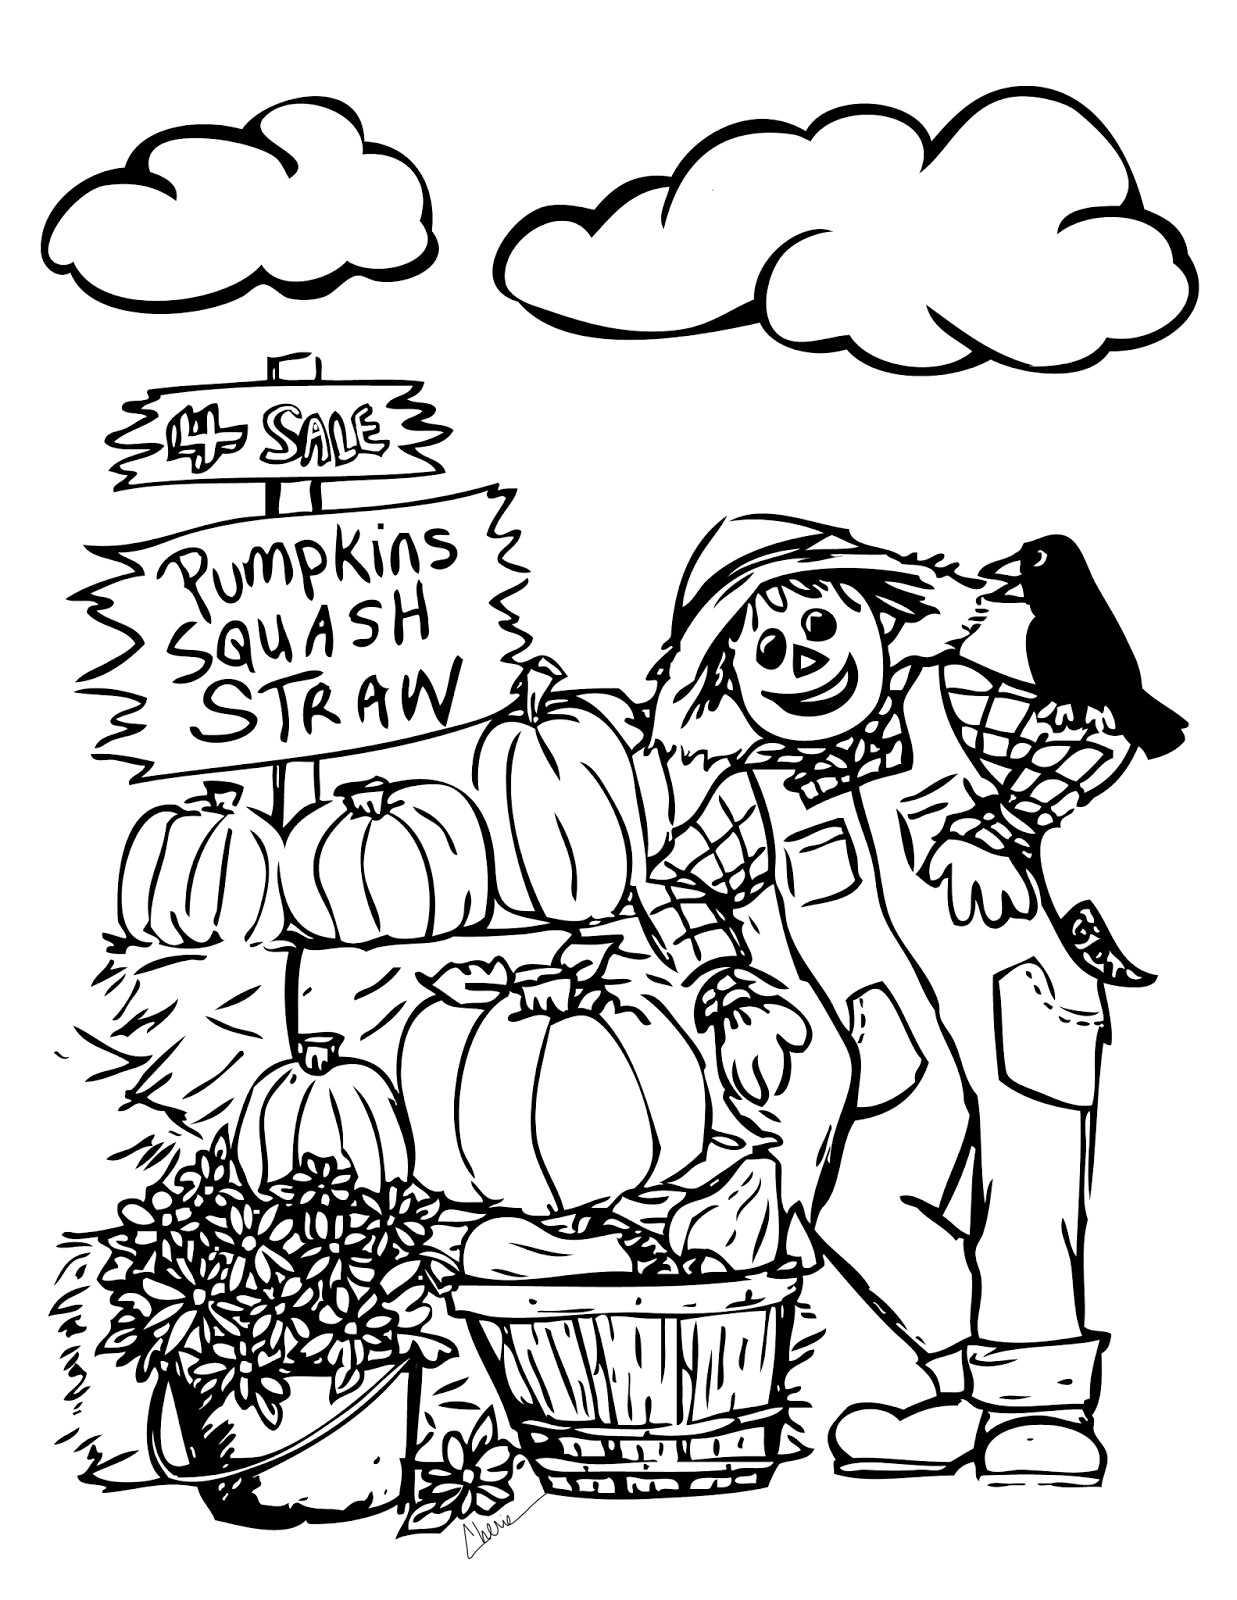 https://www.bestcoloringpagesforkids.com/wp-content/uploads/2016/08/Fall-Scarecrow-Coloring-Page.jpg